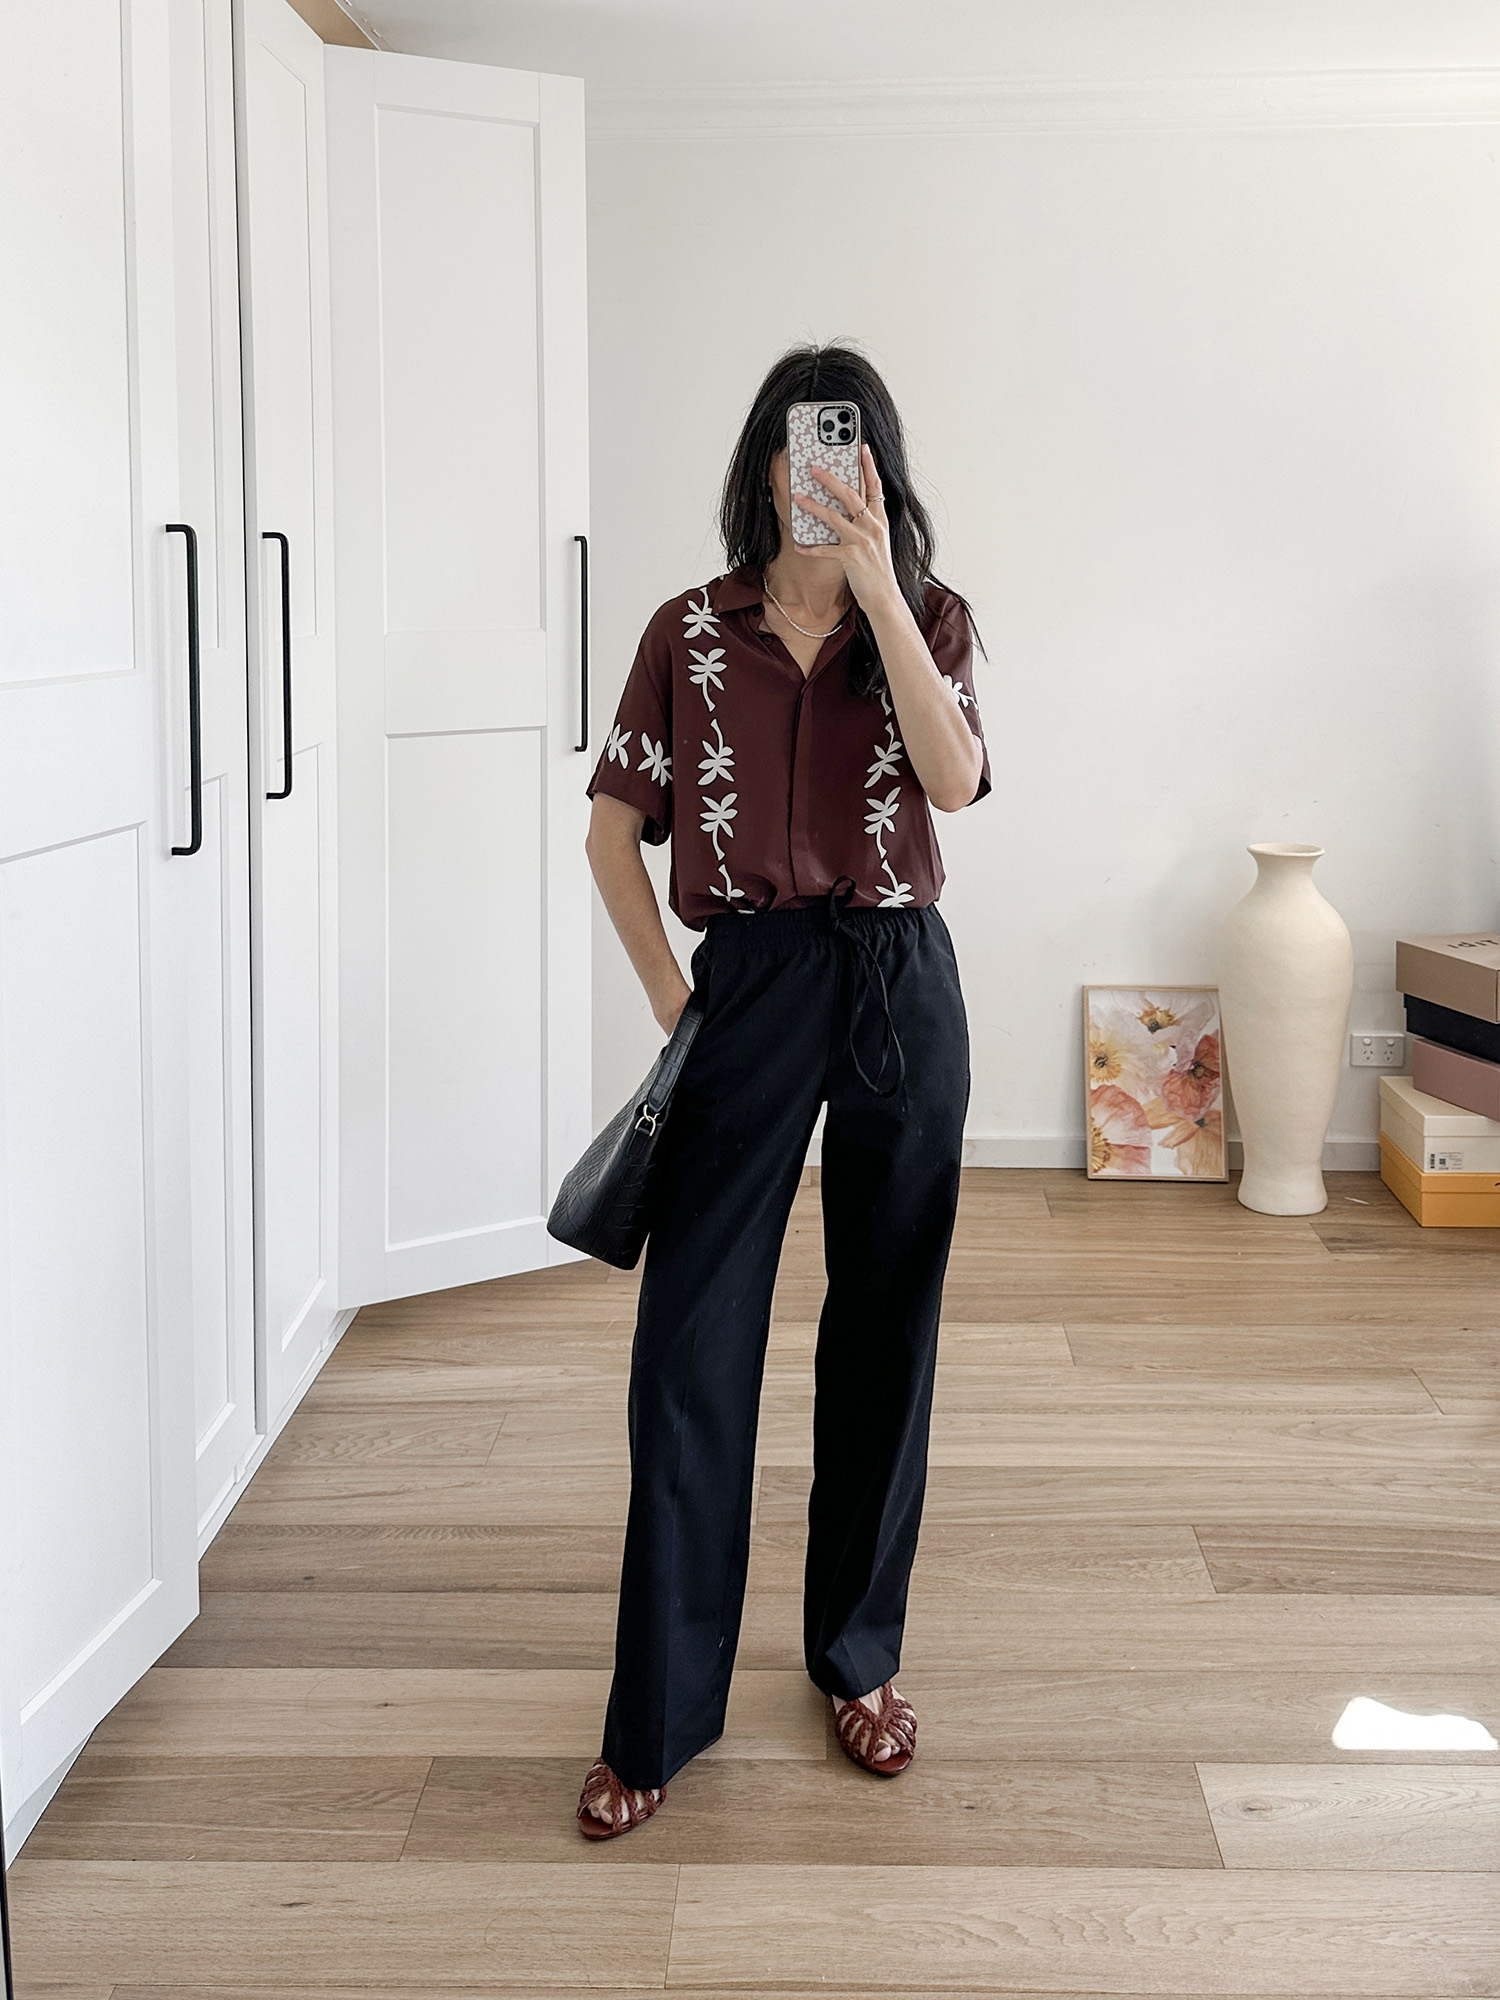 fcity.in - Style One Simplicity Straight Leg Pants Trousers / Comfy  Glamorous